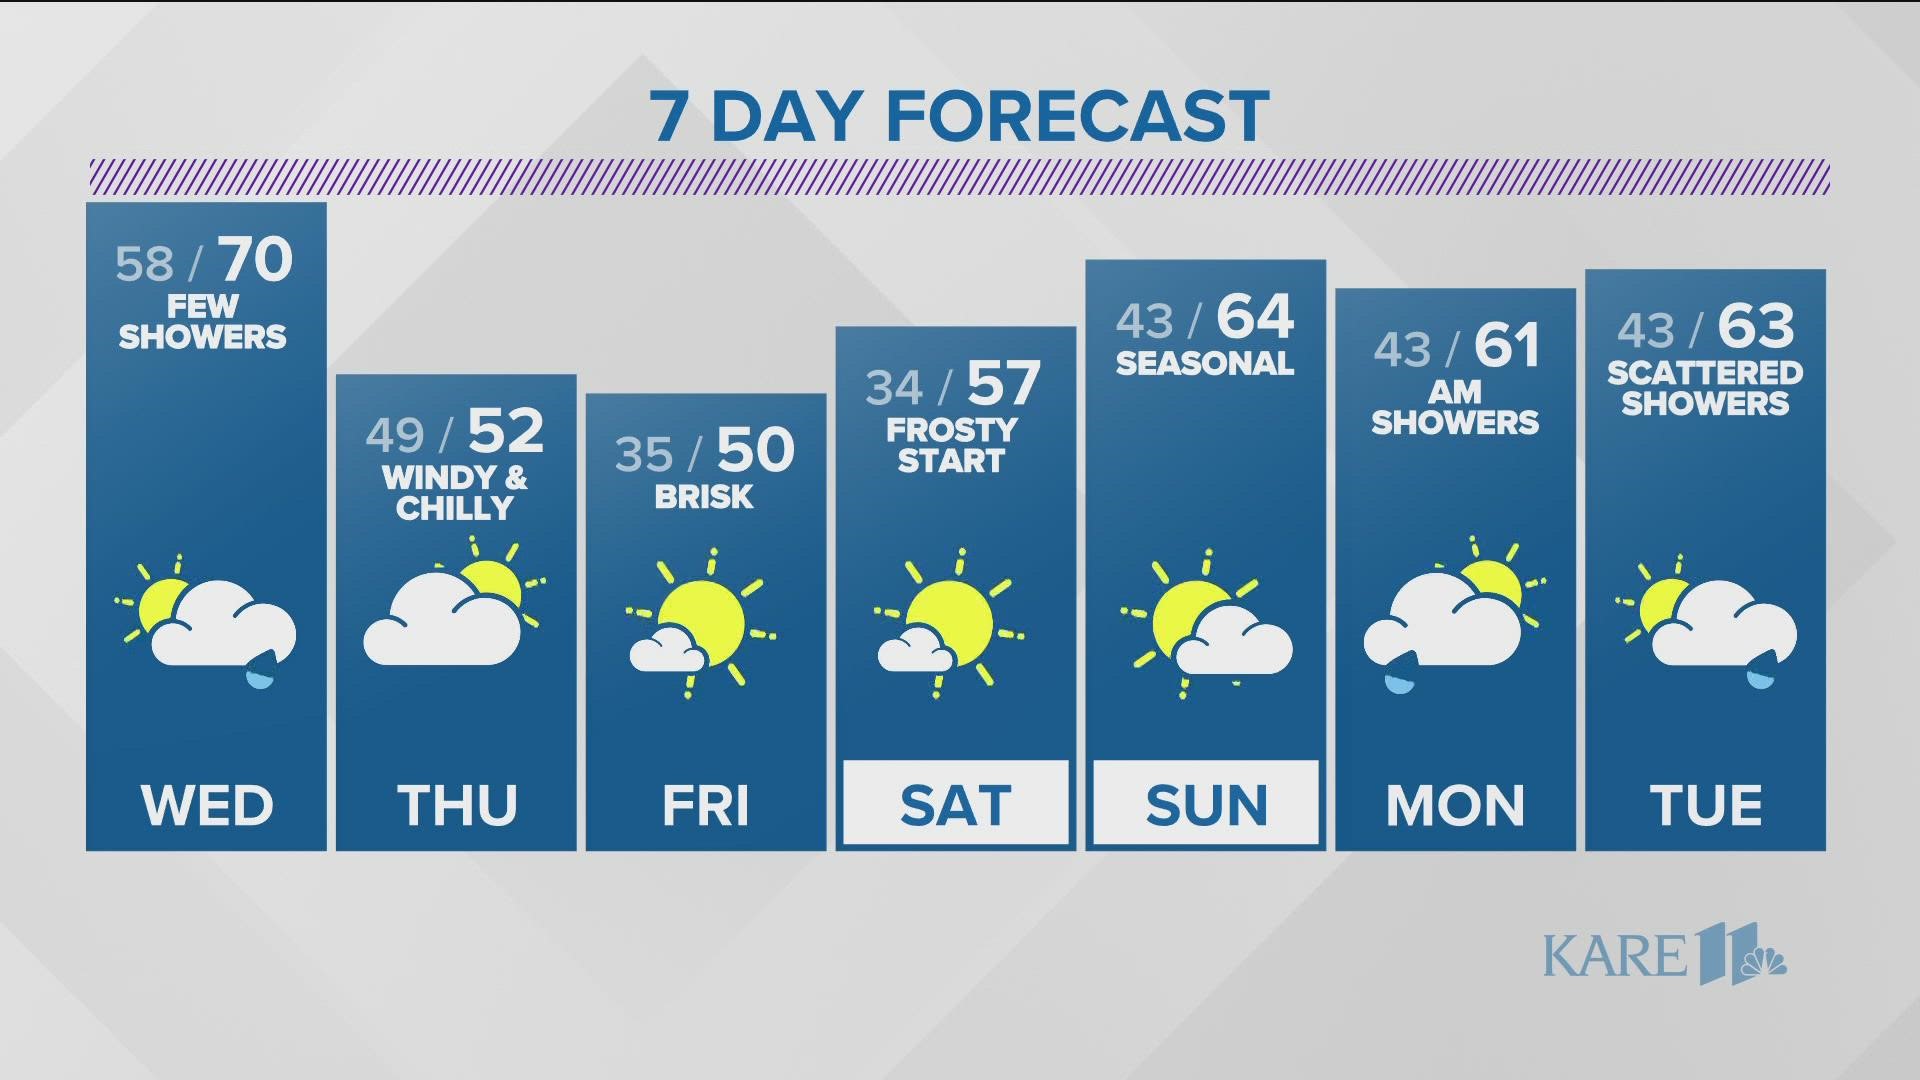 Much cooler and windy starting on Thursday, and the sun returns late in the week.